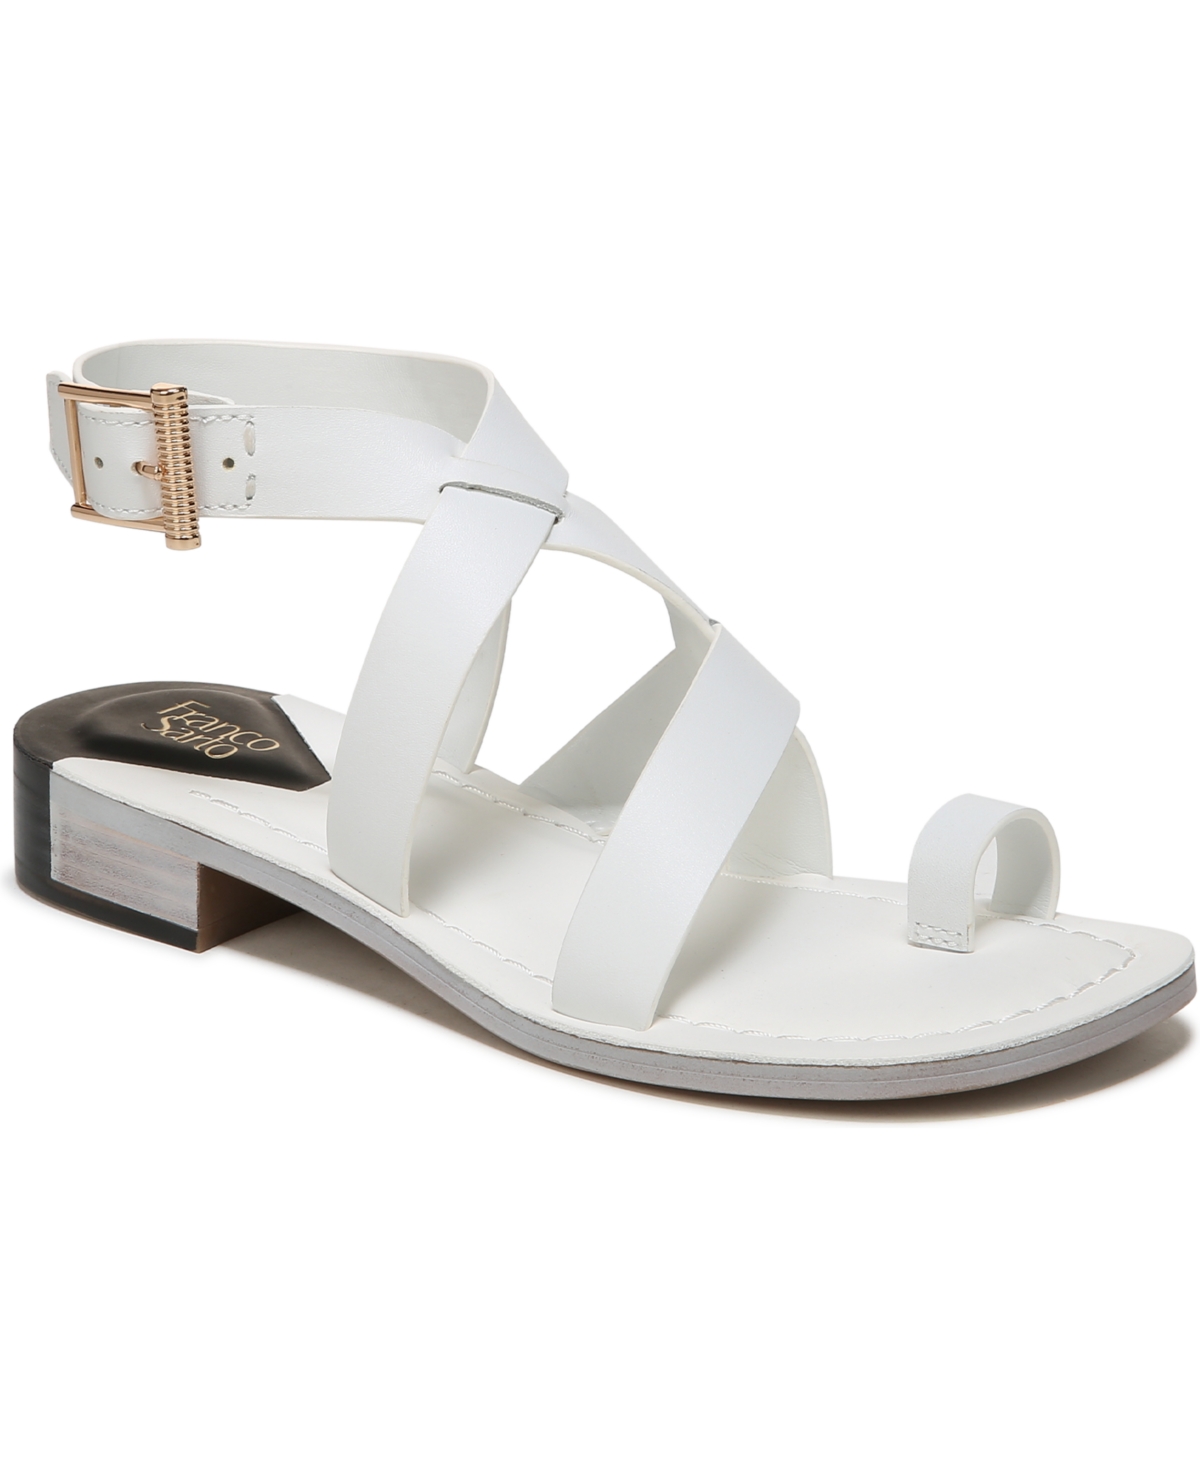 Women's Ina Toe Loop Ankle Strap Stacked Heel Sandals - Silver Faux Leather